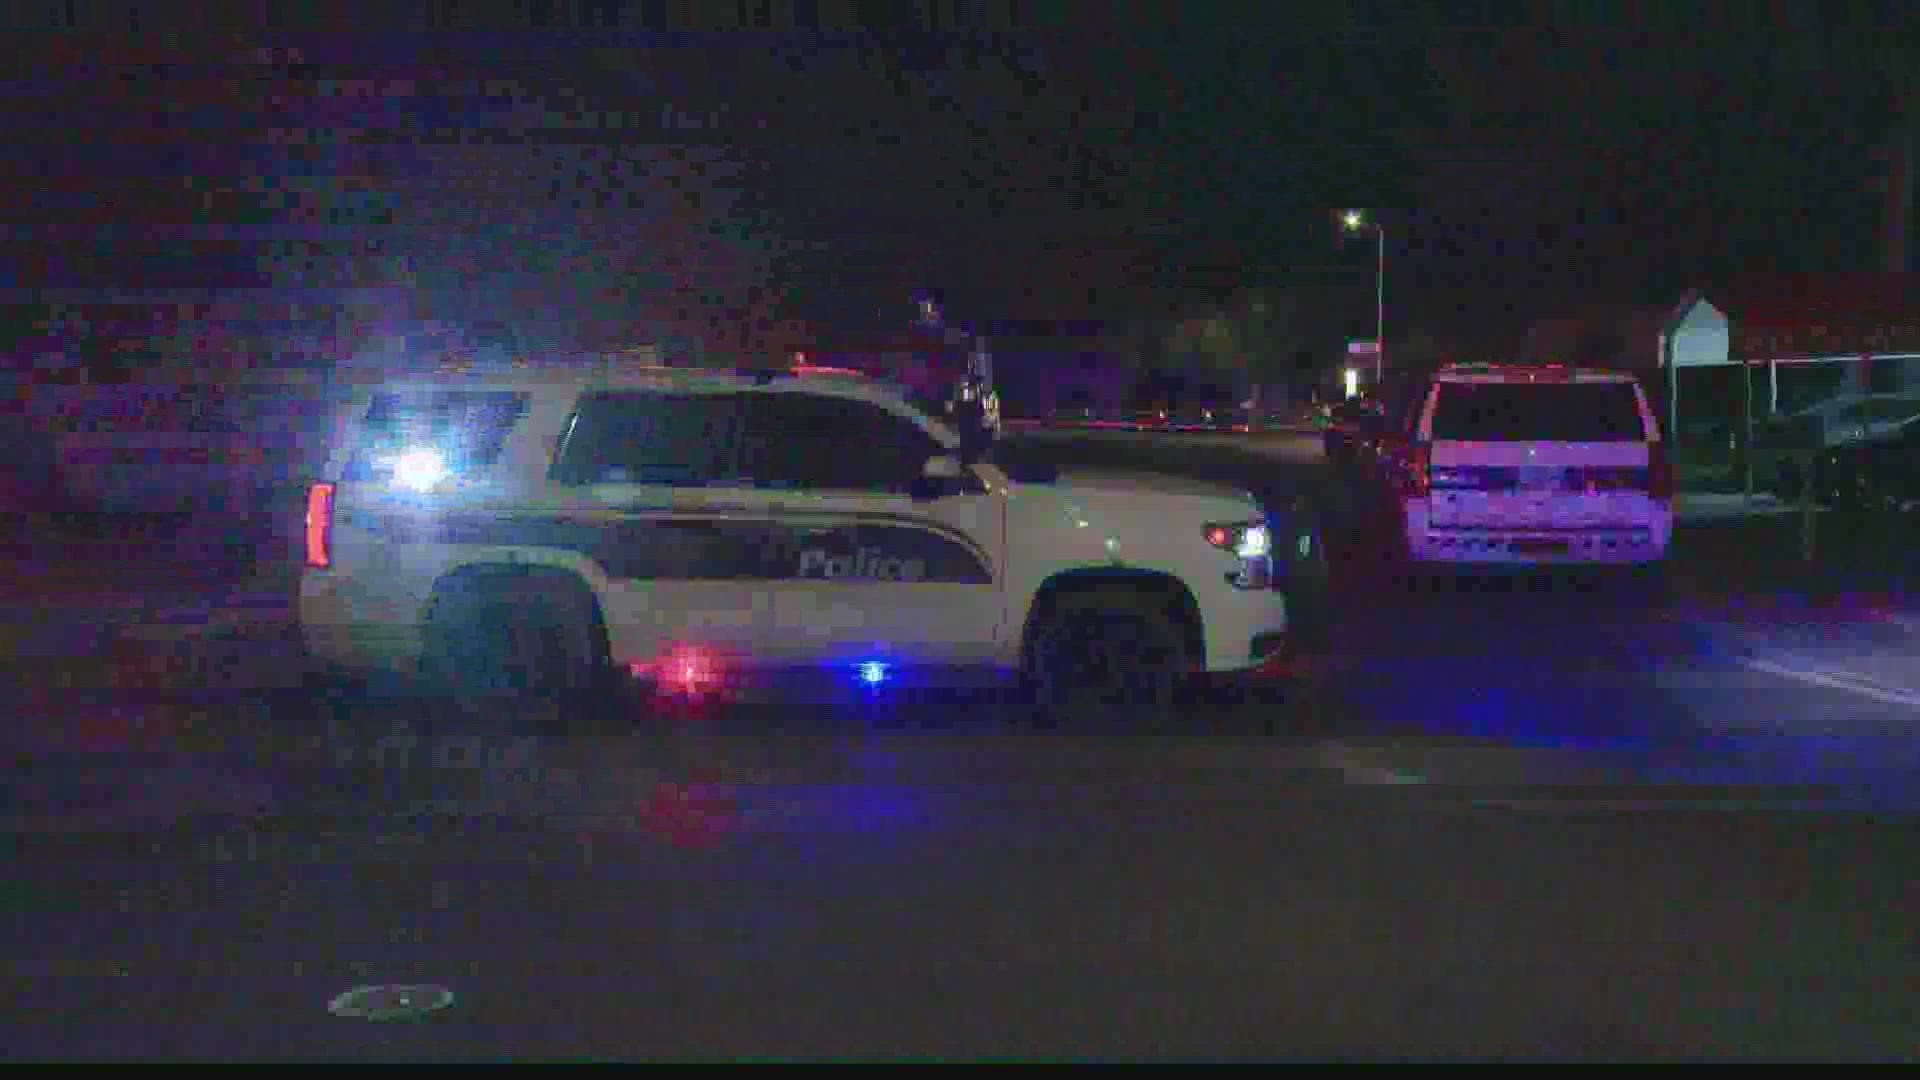 One person suffers non-life threatening injuries in shooting at Valley